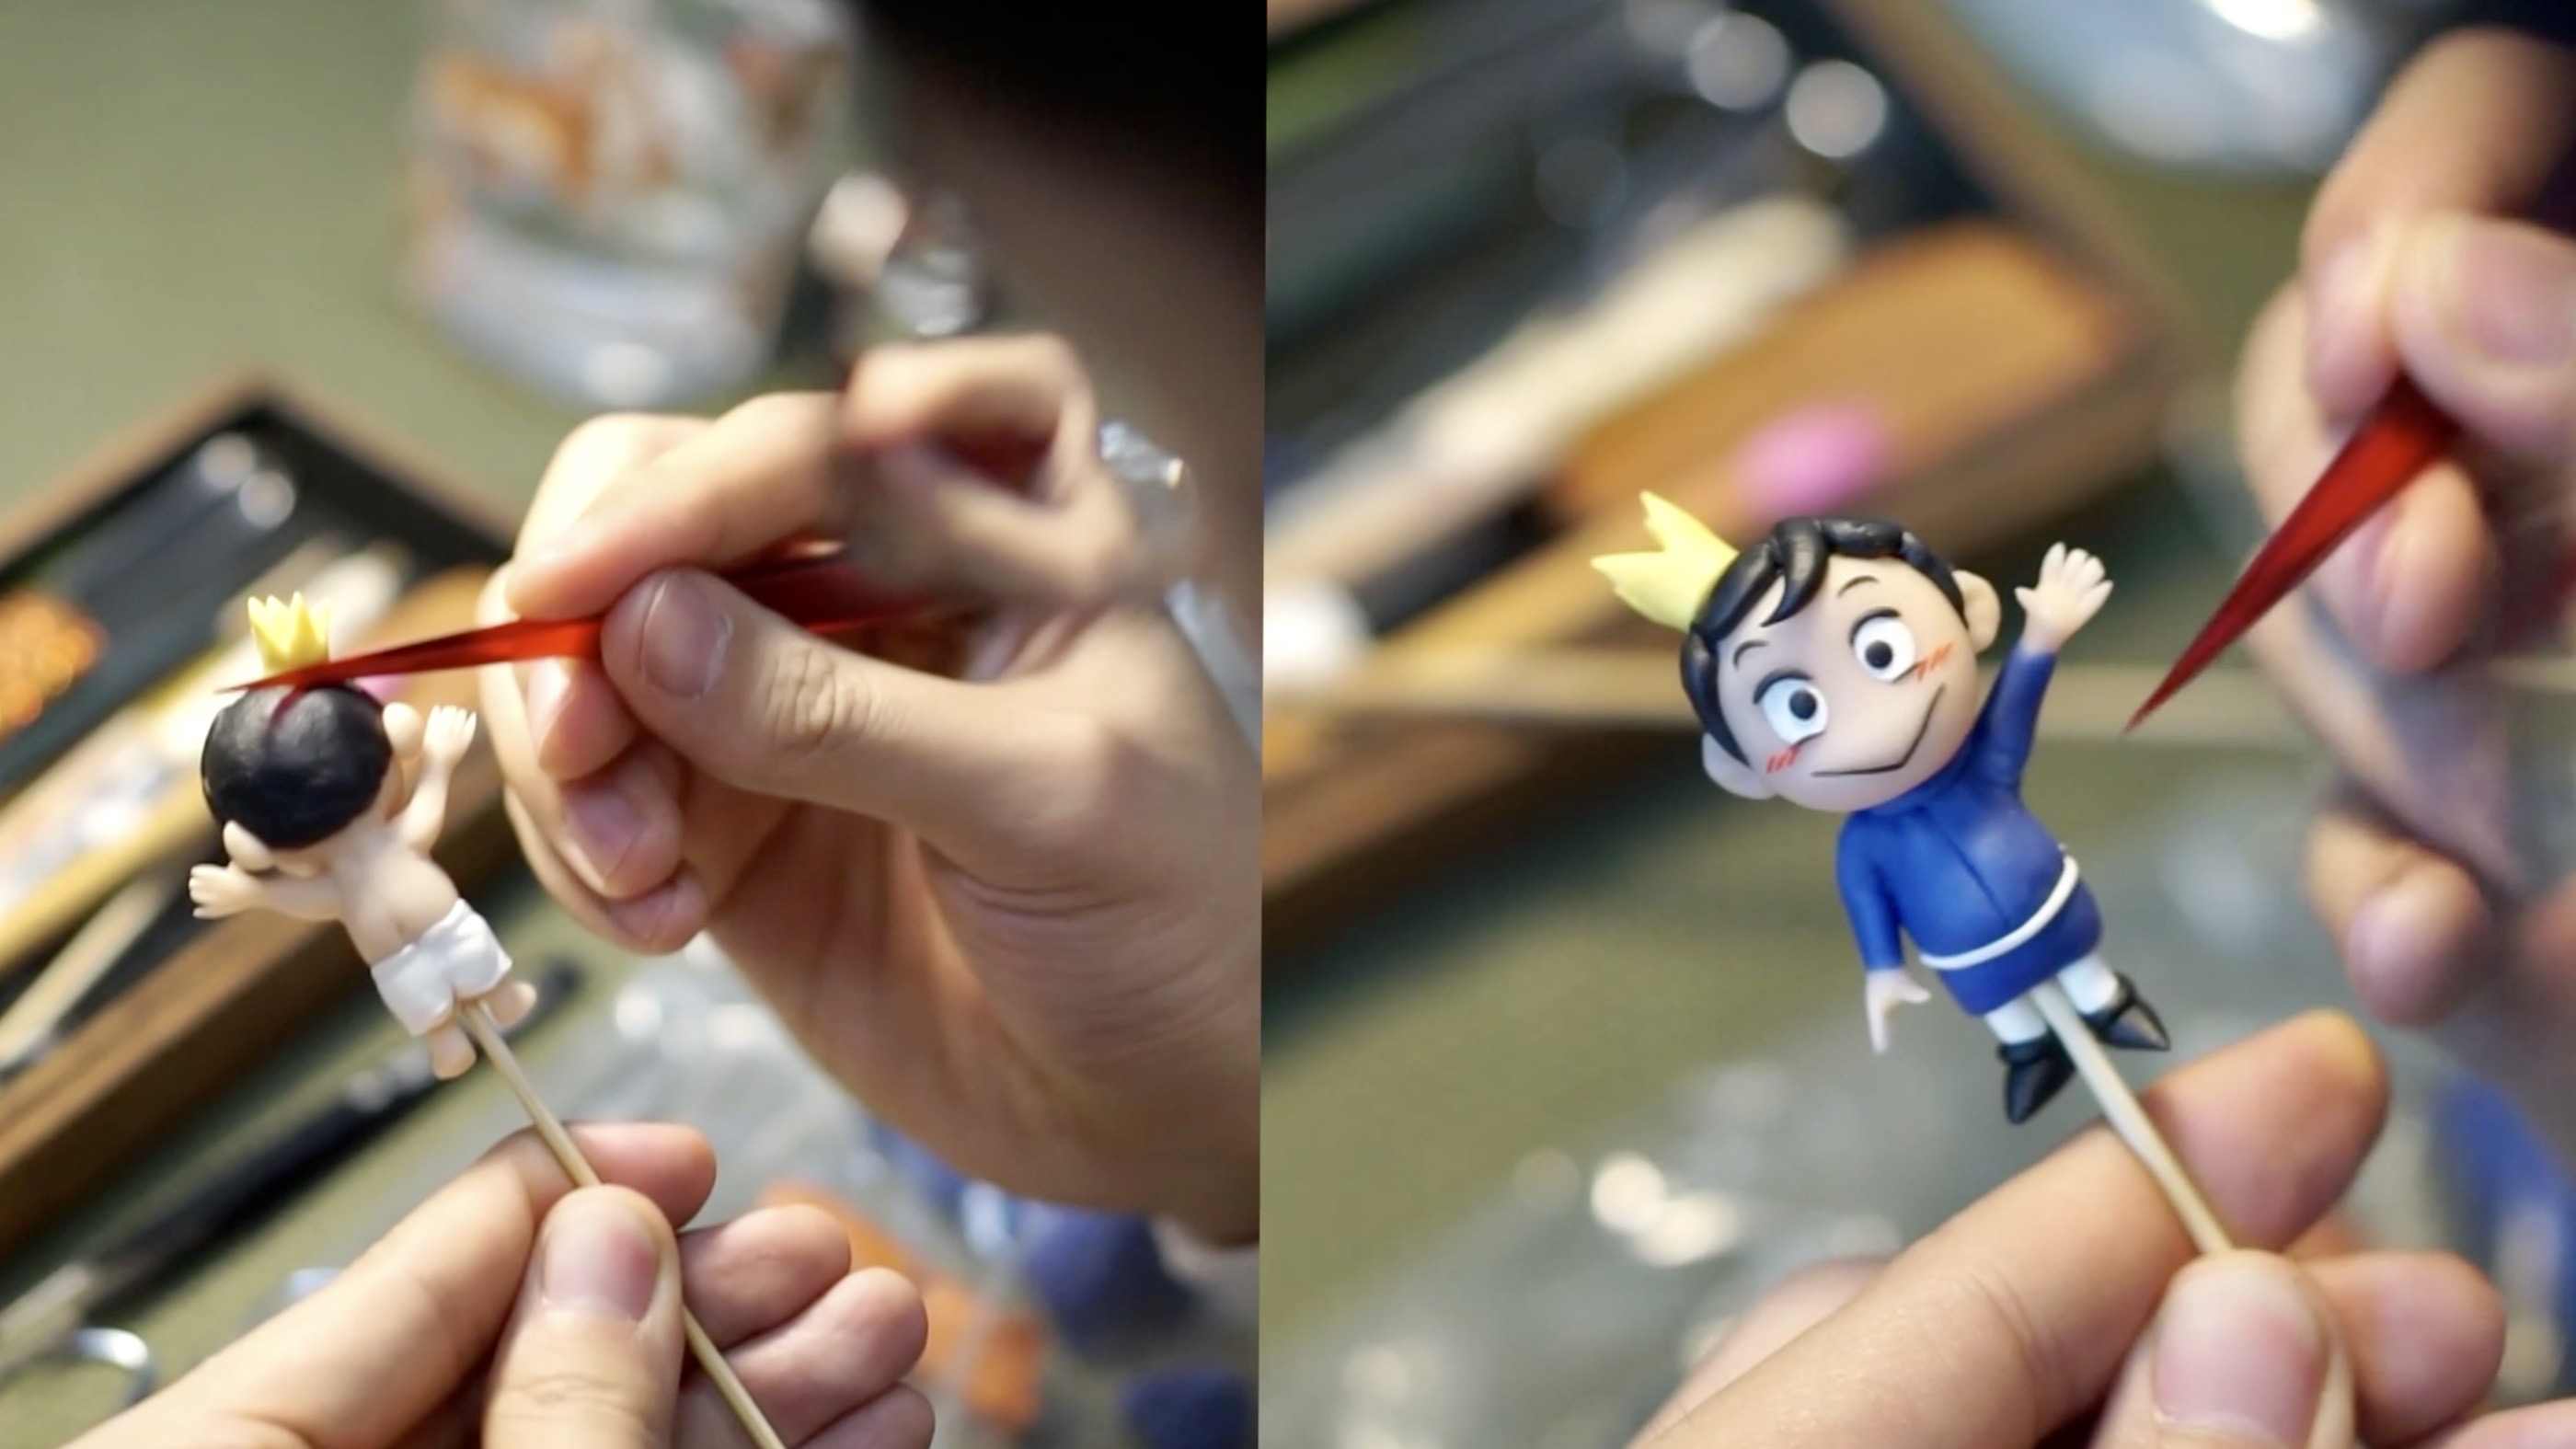 Lang Jiaziyu makes a dough figurine inspired by the 2021 anime series 